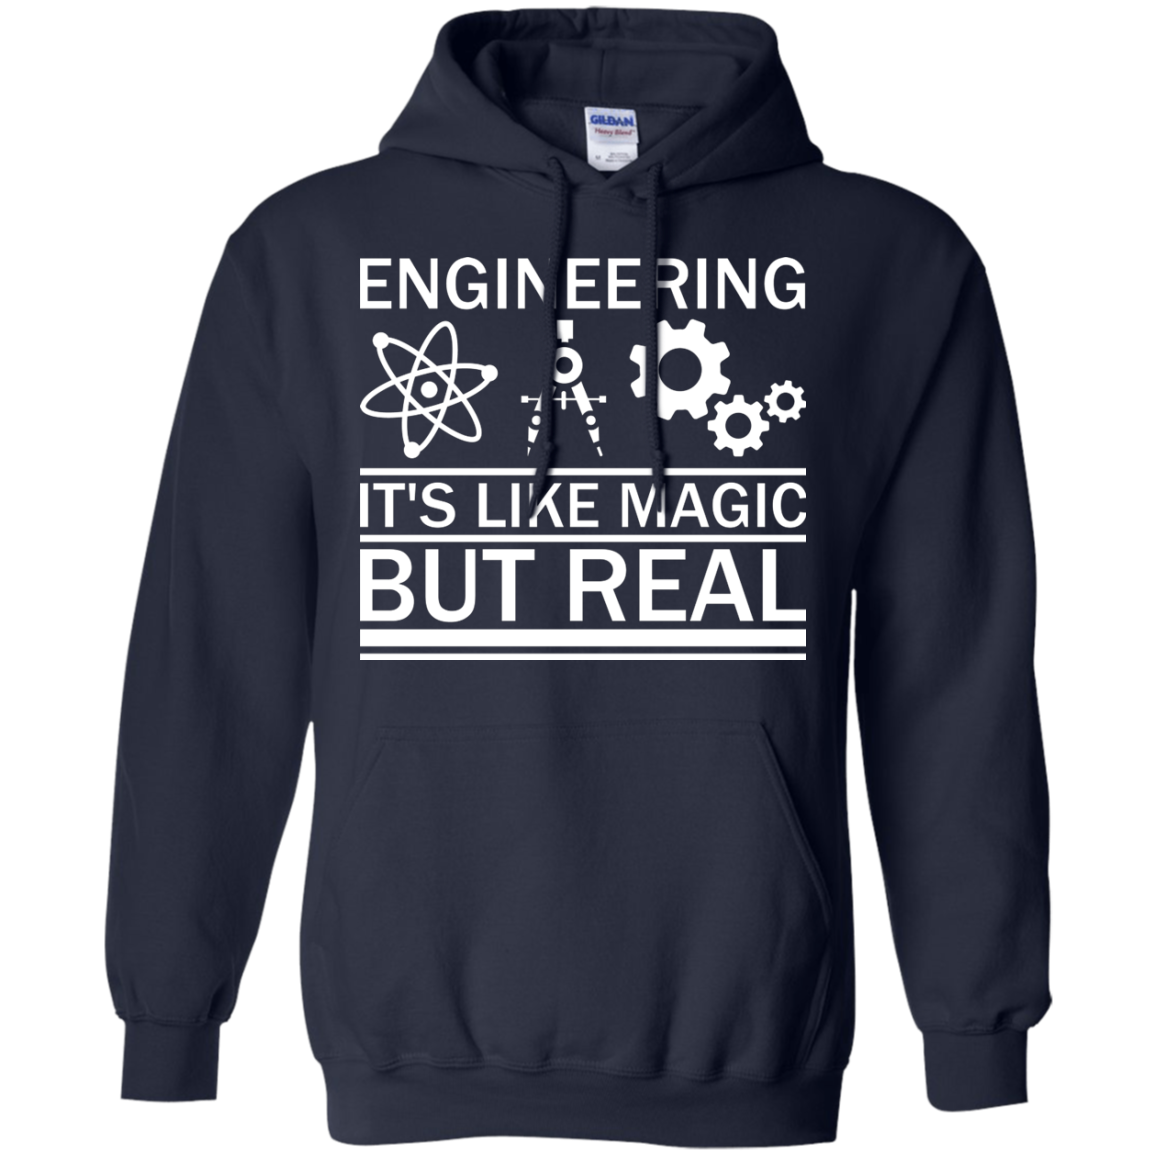 Engineering - It's Like Magic But Real